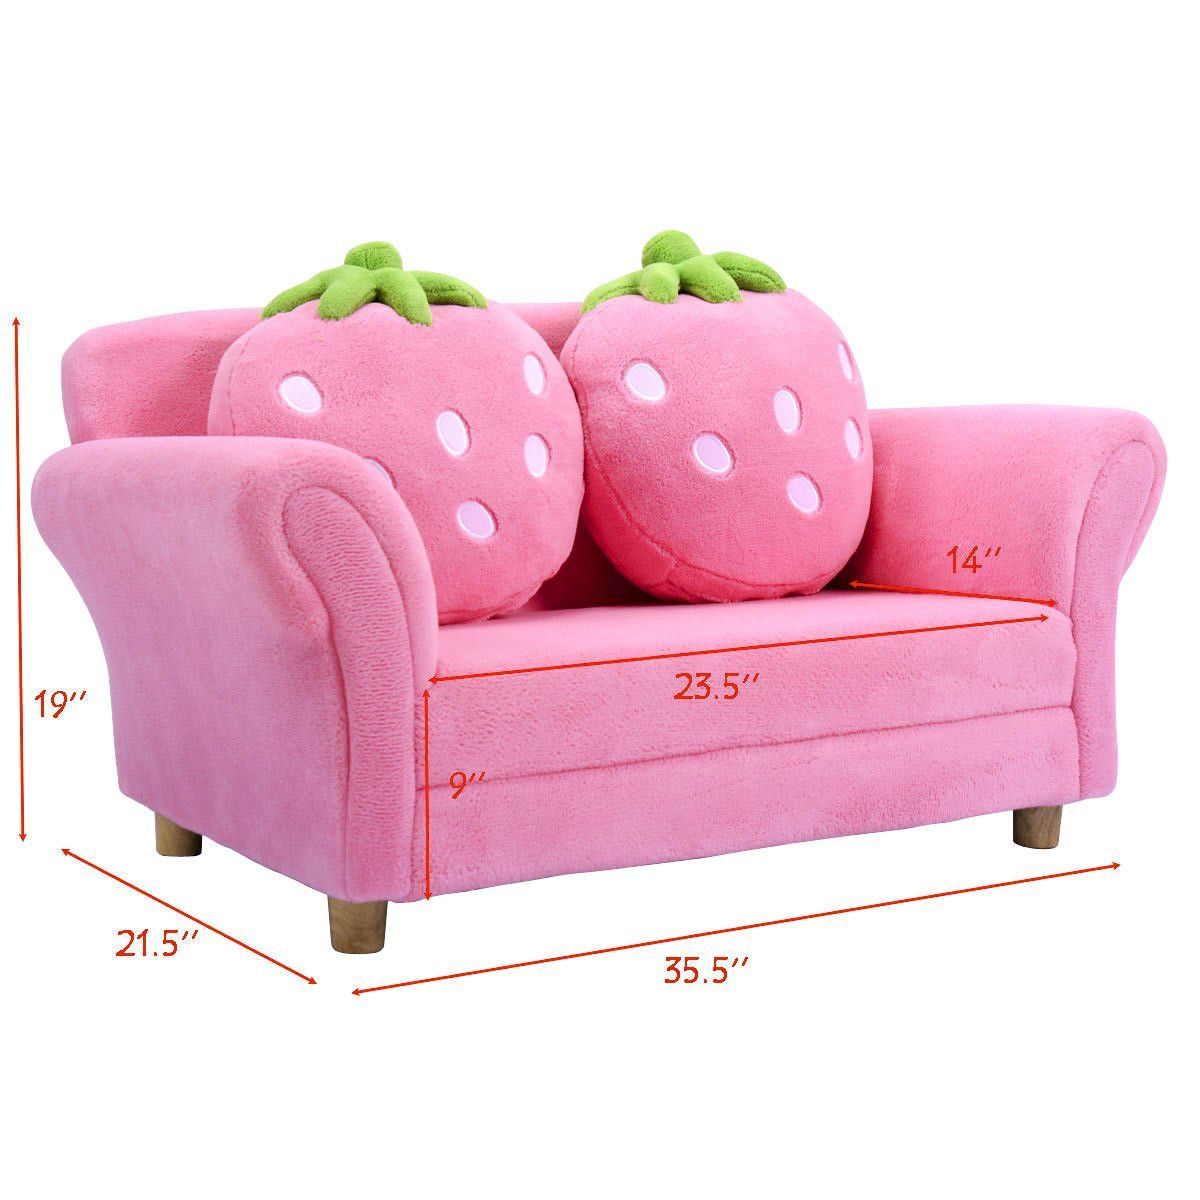 Costzon Children Sofa Kids Couch Armrest Chair Upholstered Living Room Pertaining To Children's Sofa Beds (View 16 of 20)